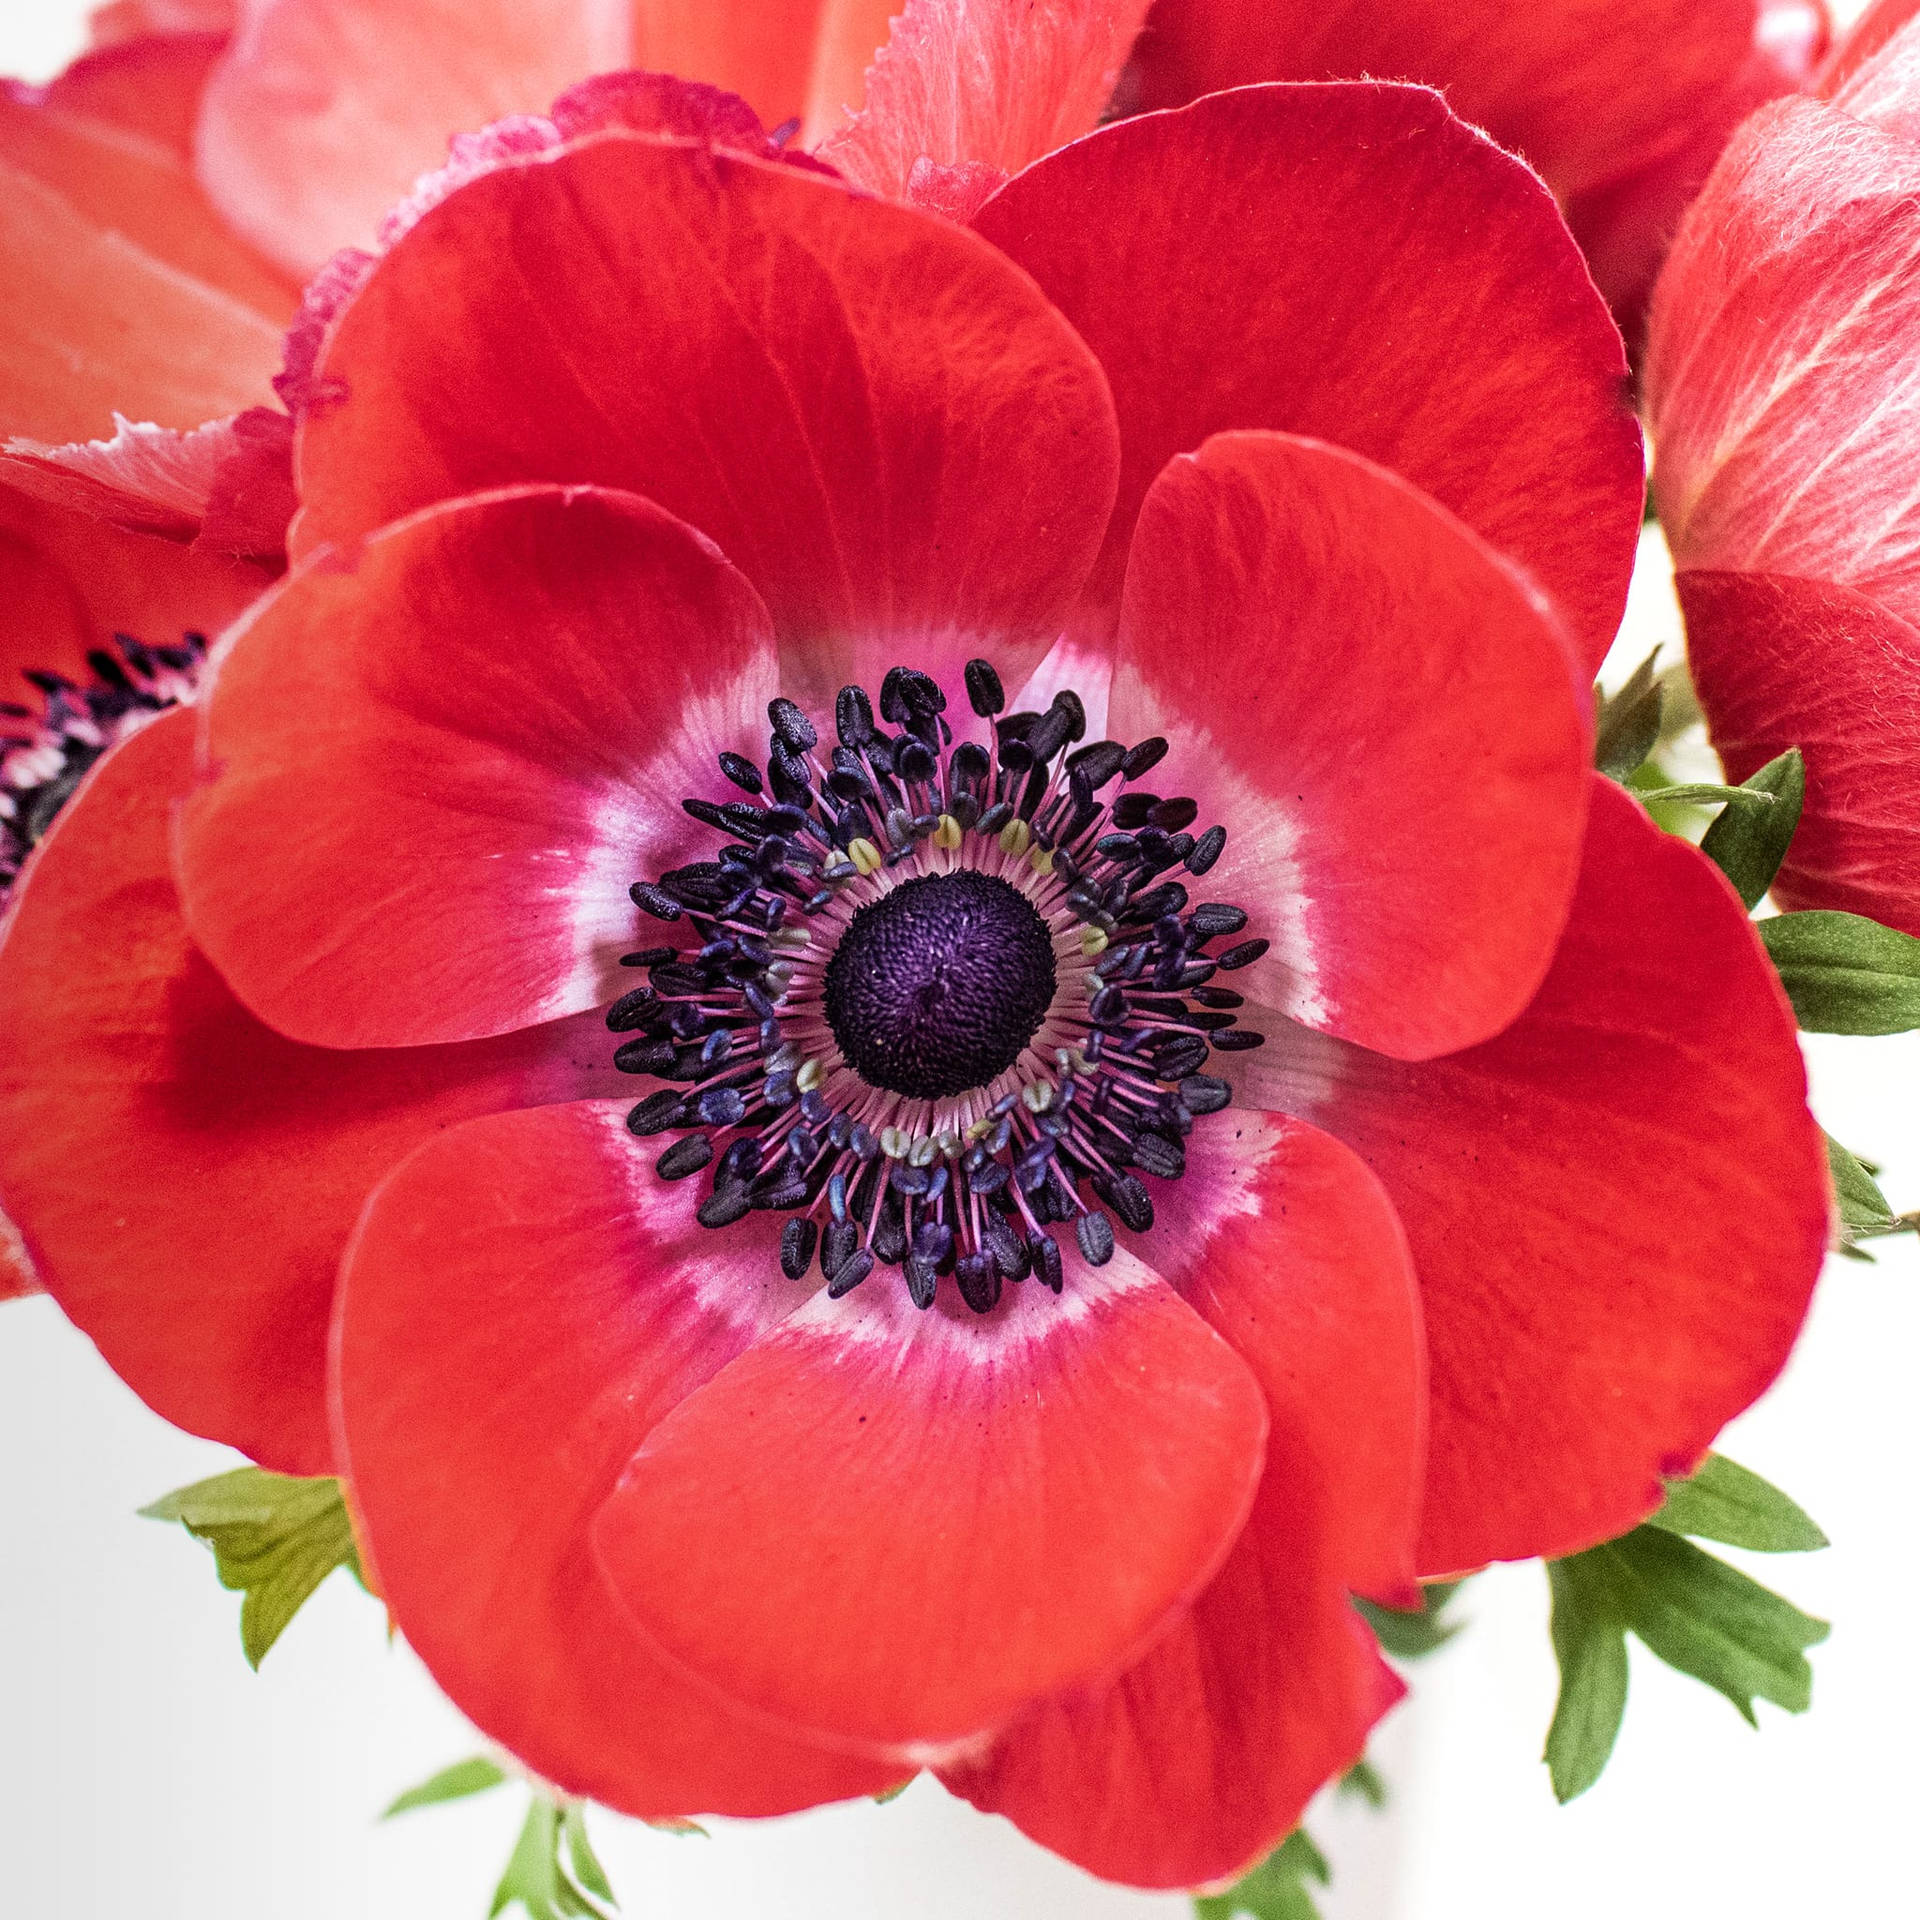 Top 999+ Anemone Flower Wallpaper Full HD, 4K Free to Use